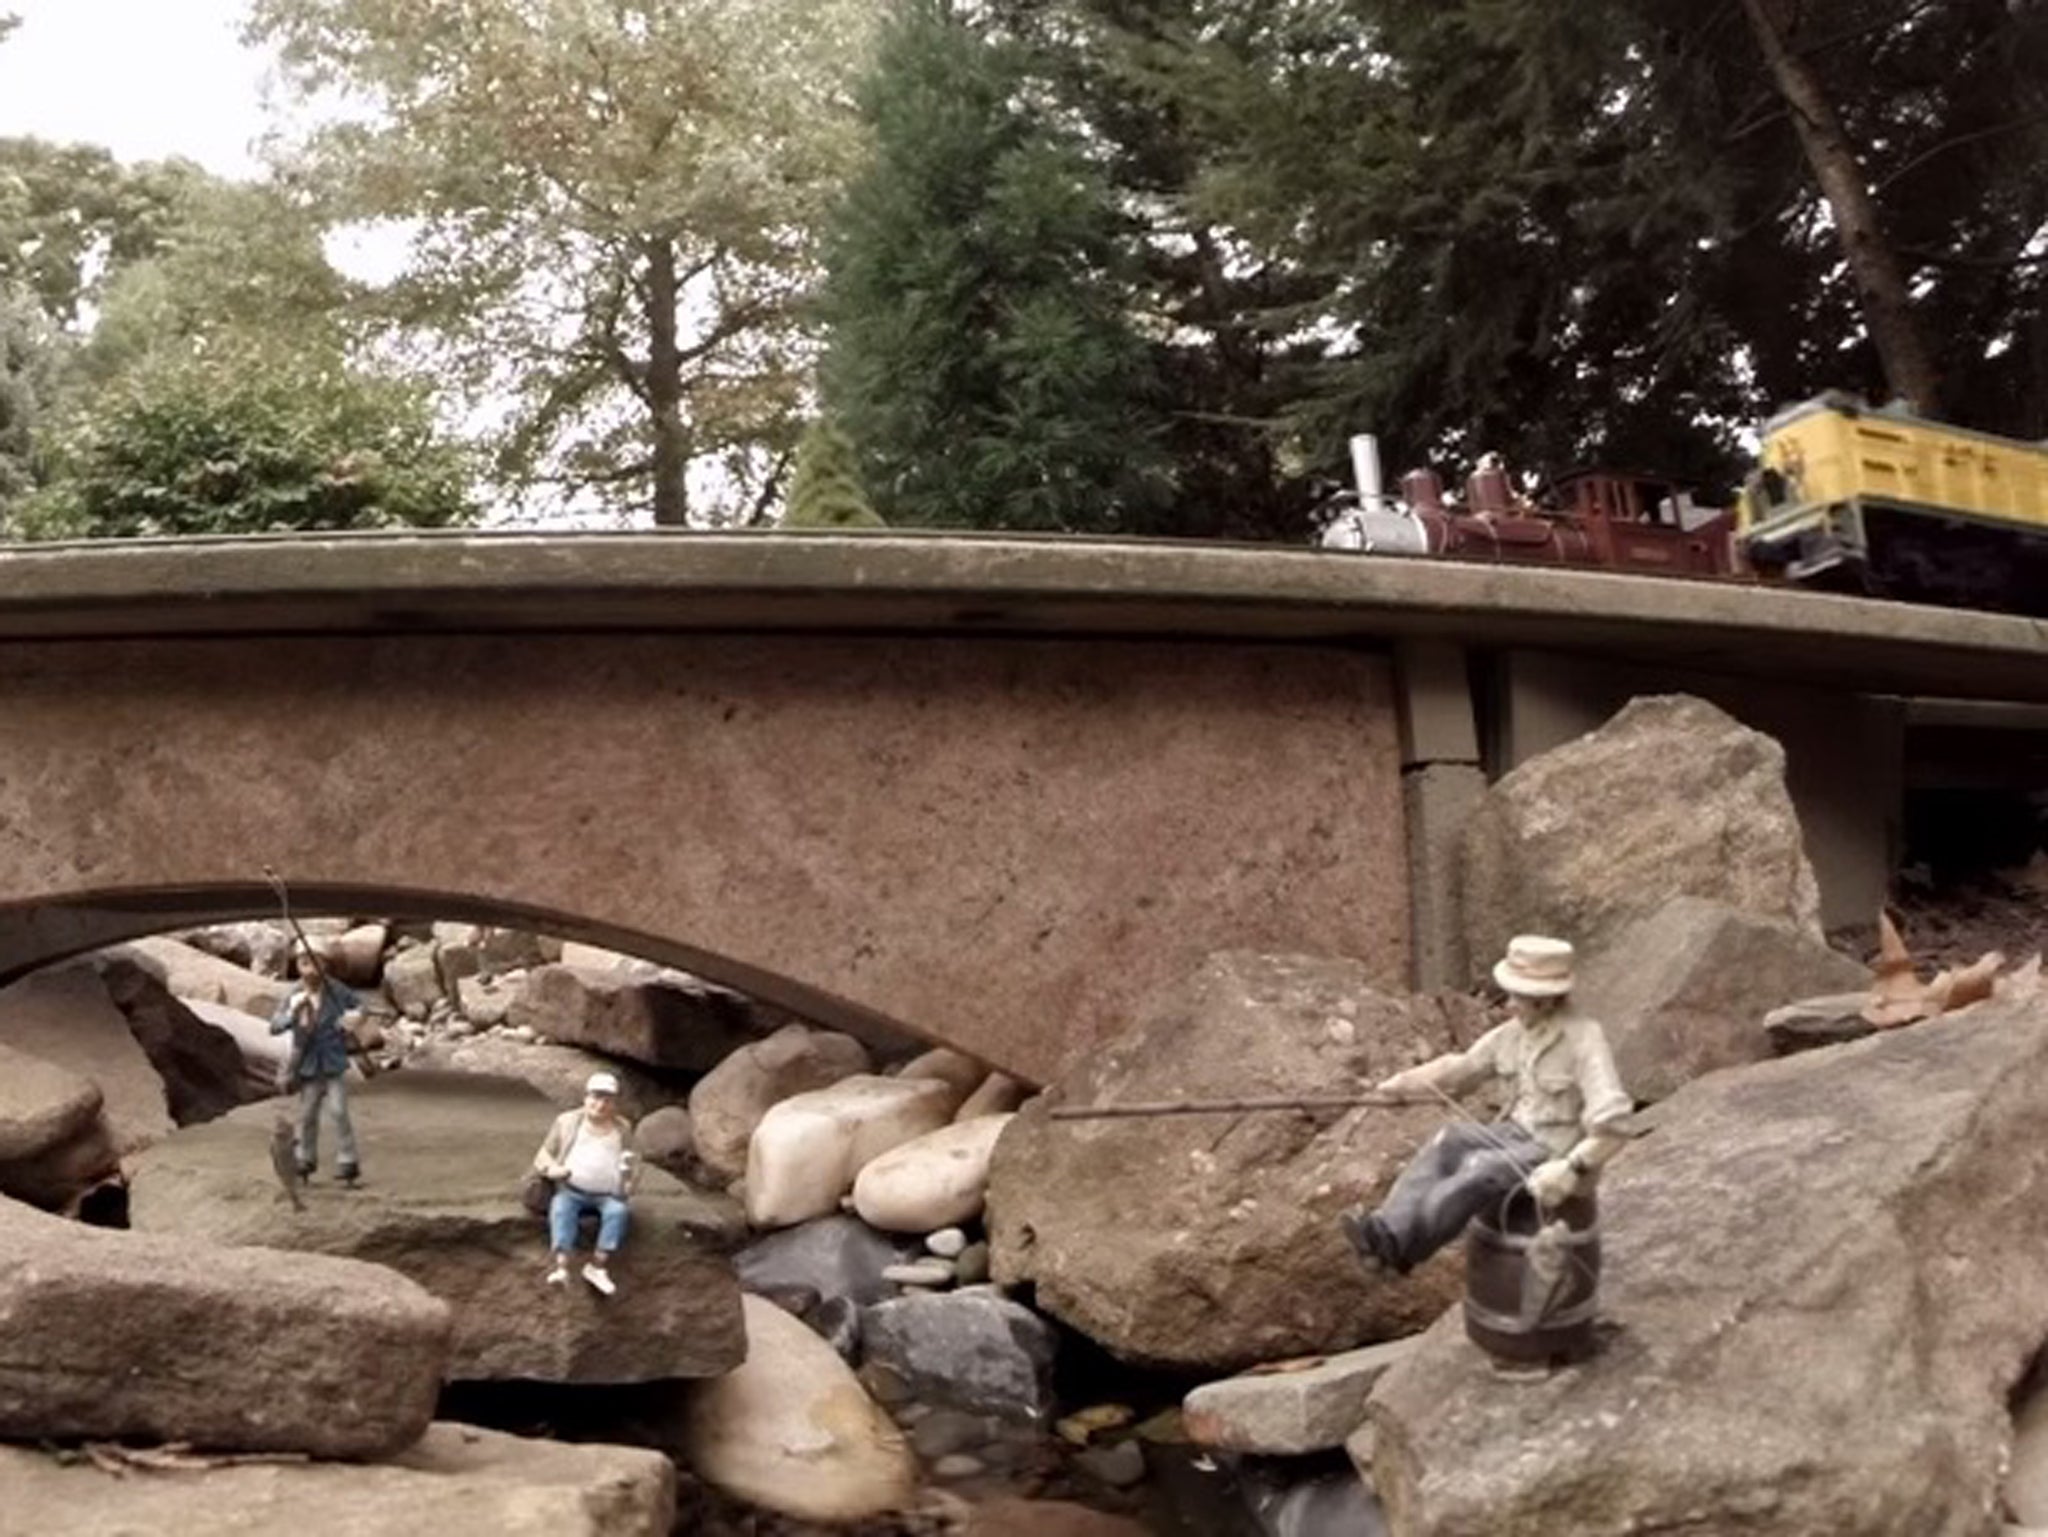 Go Pro strapped to model railroad captures amazing footage